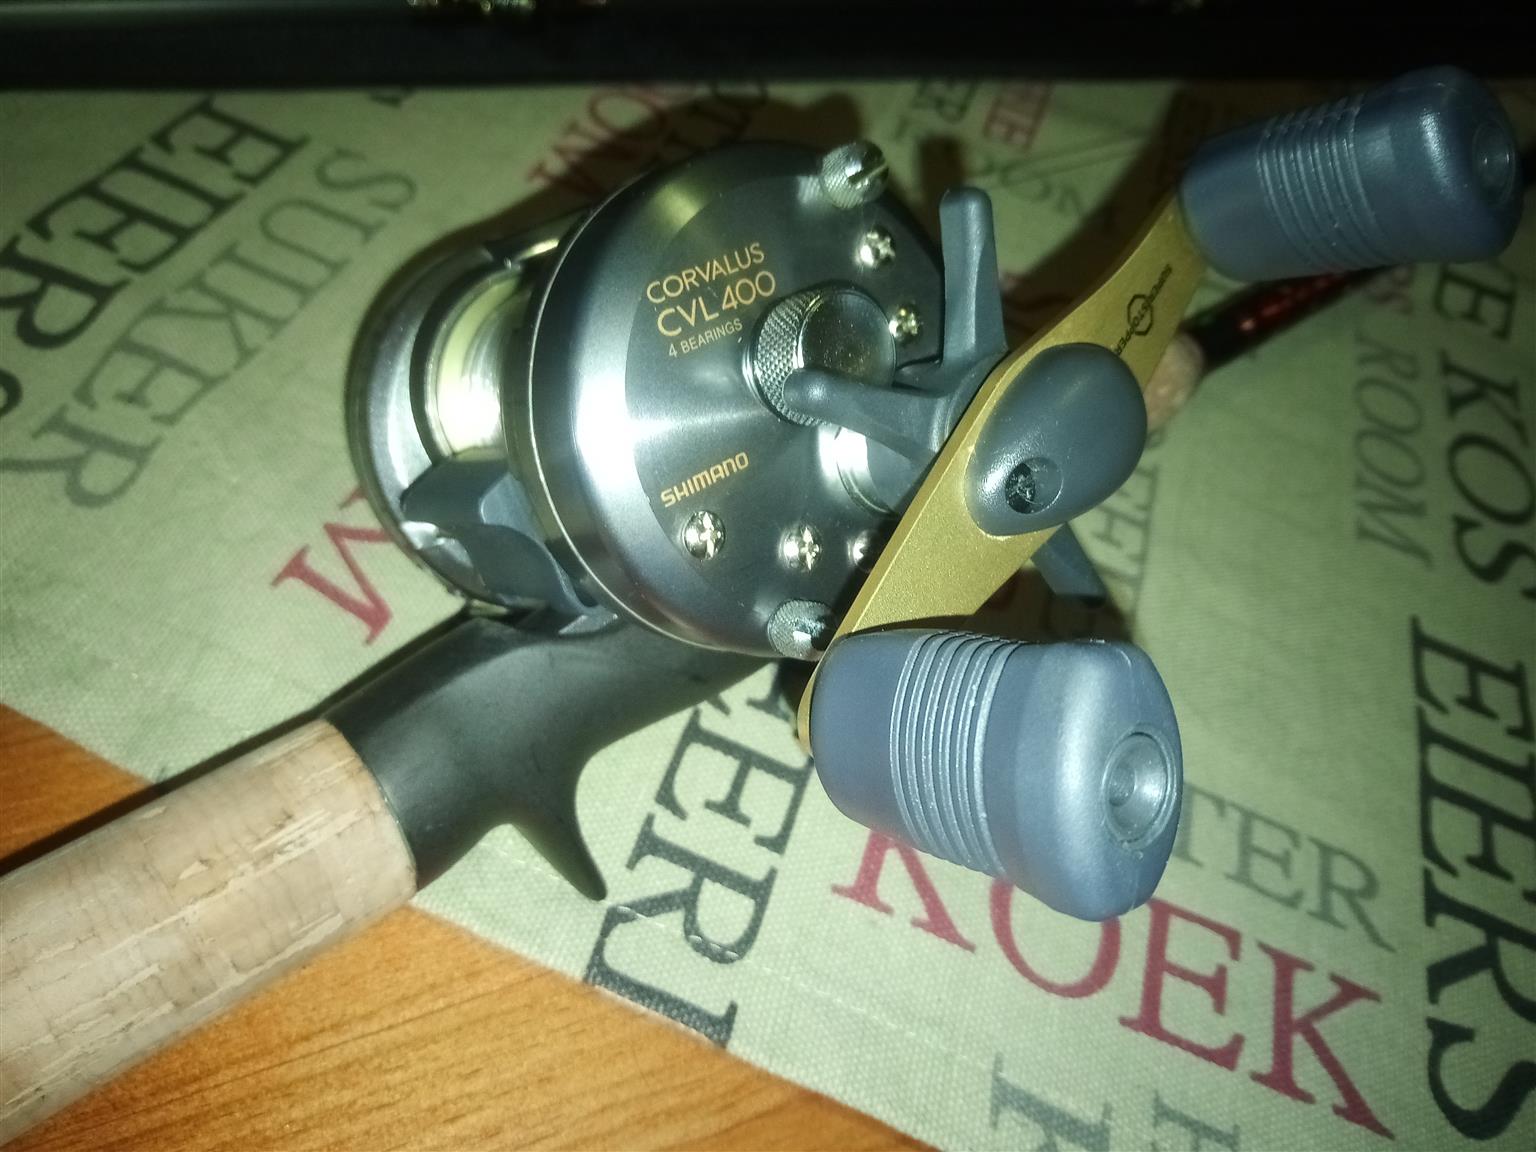 Shimano Corvalus CVL 400 with Diawa ProCaster